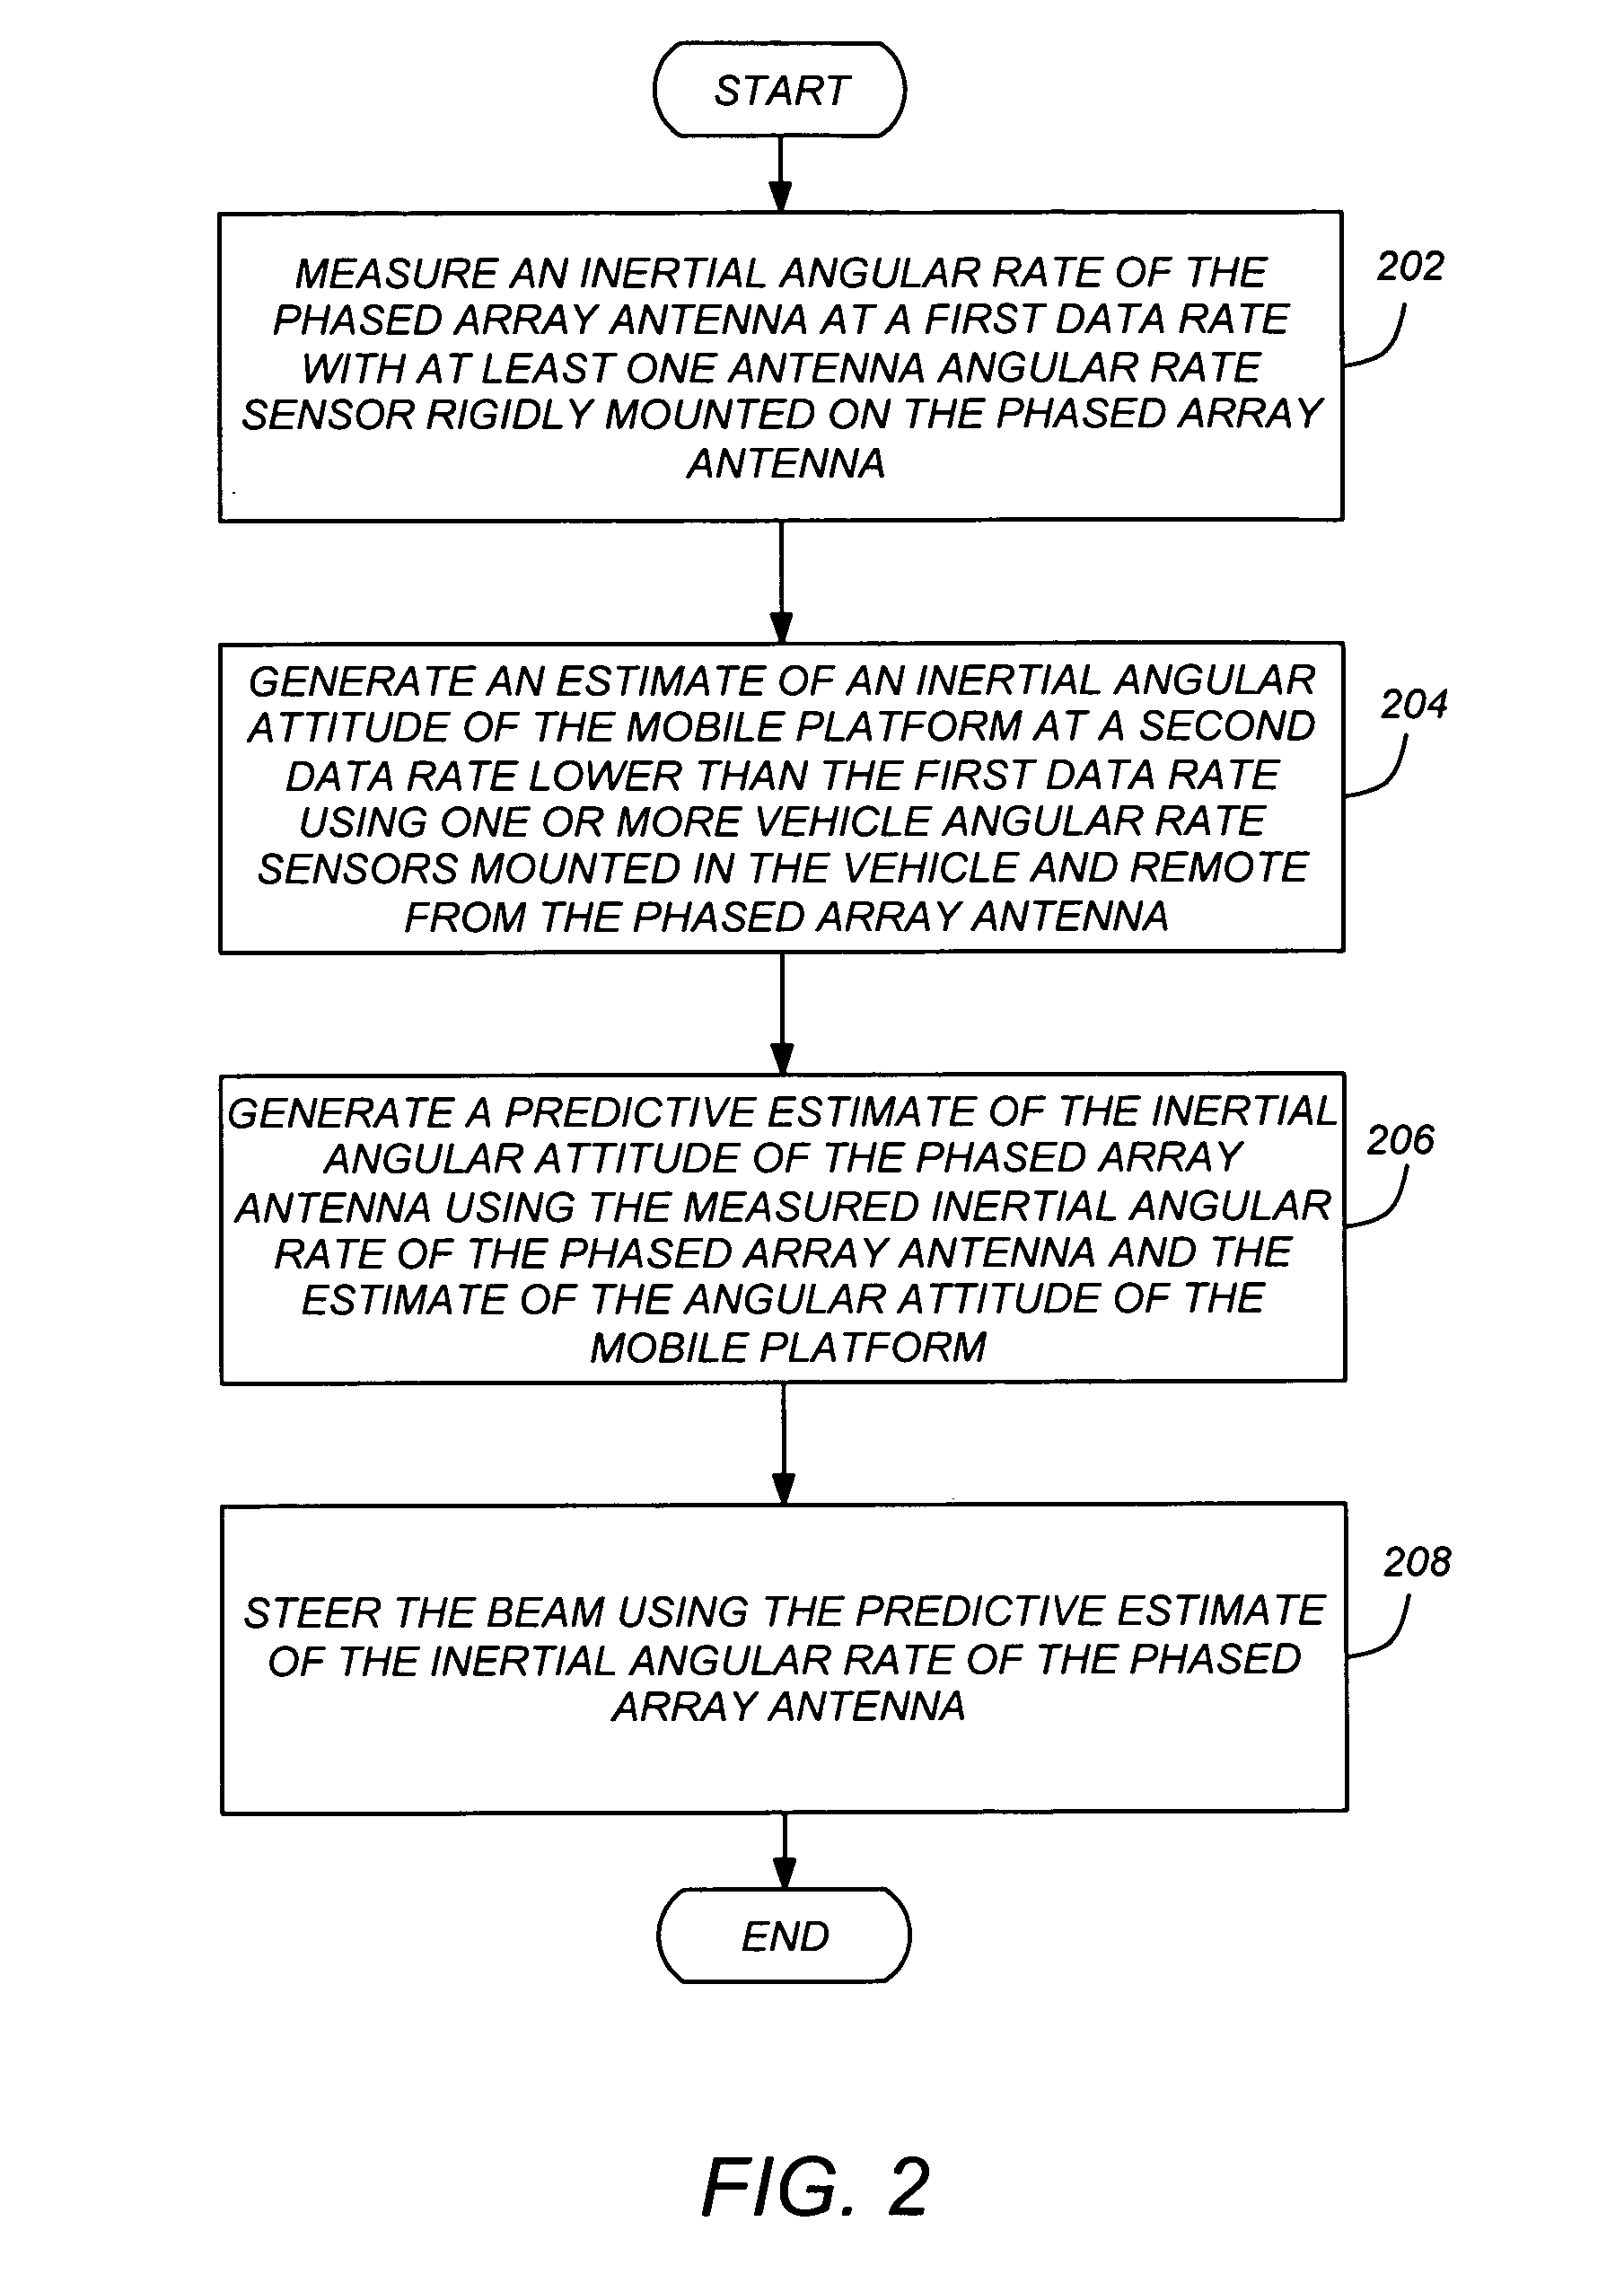 Beam steering control for mobile antennas